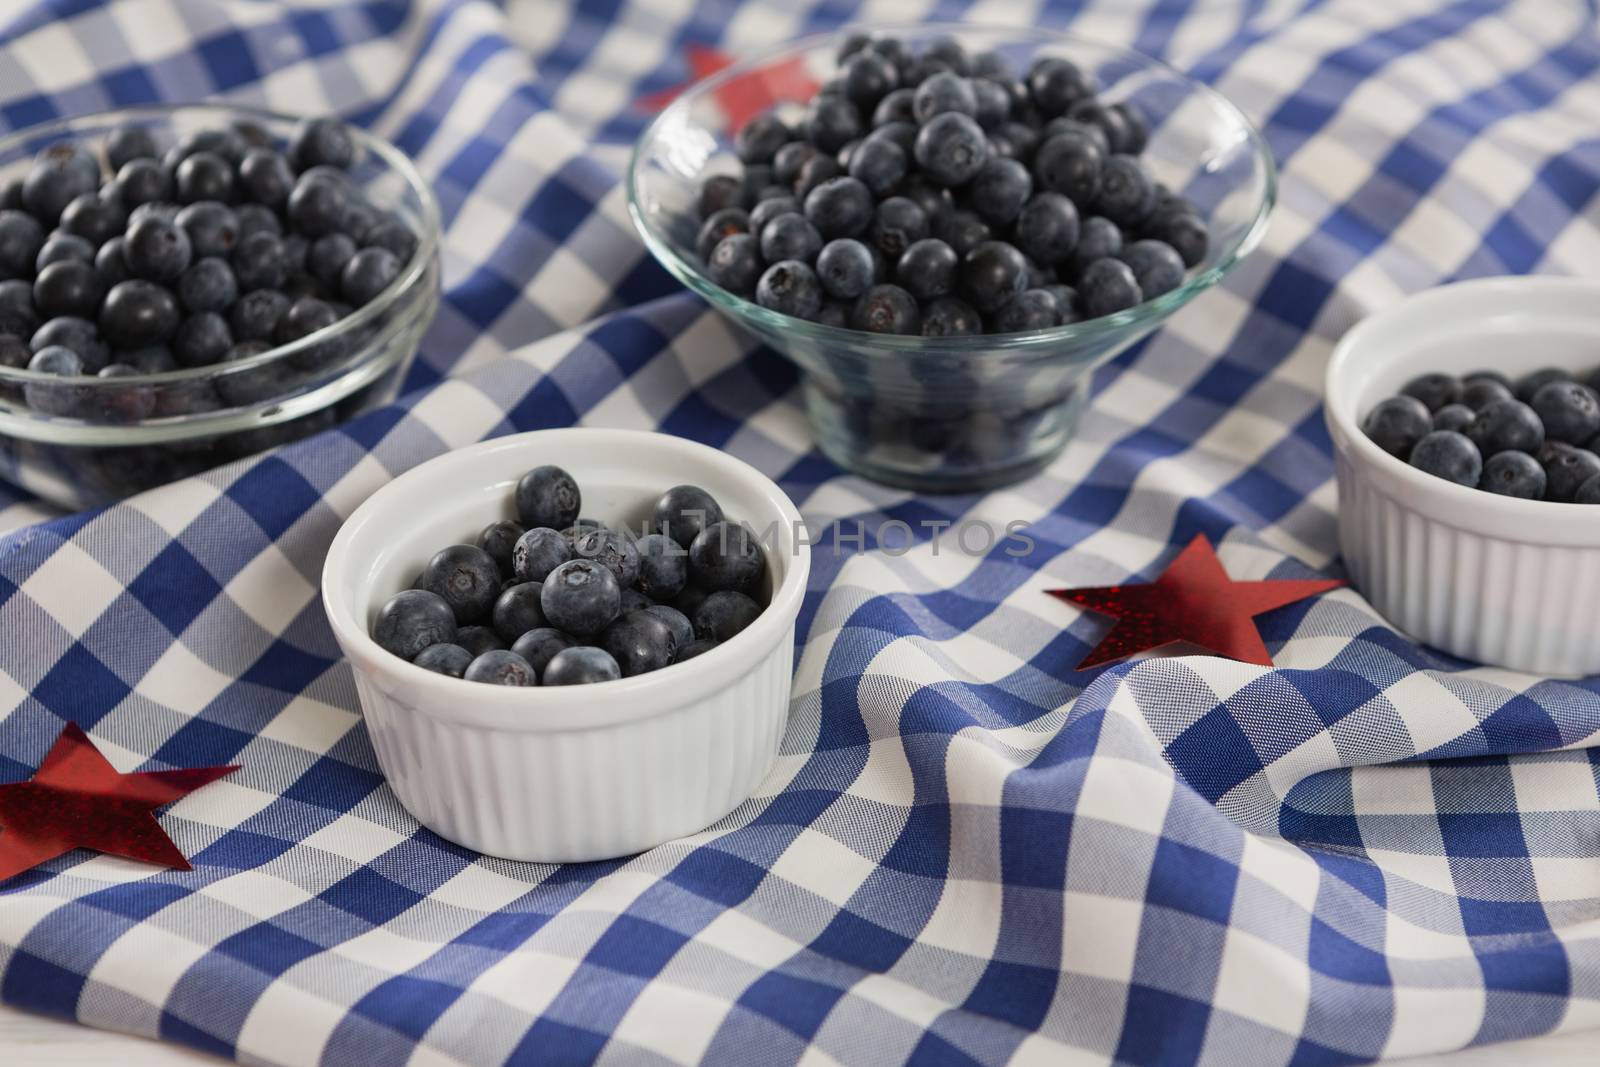 Black berries in bowls with 4th july theme on wooden table